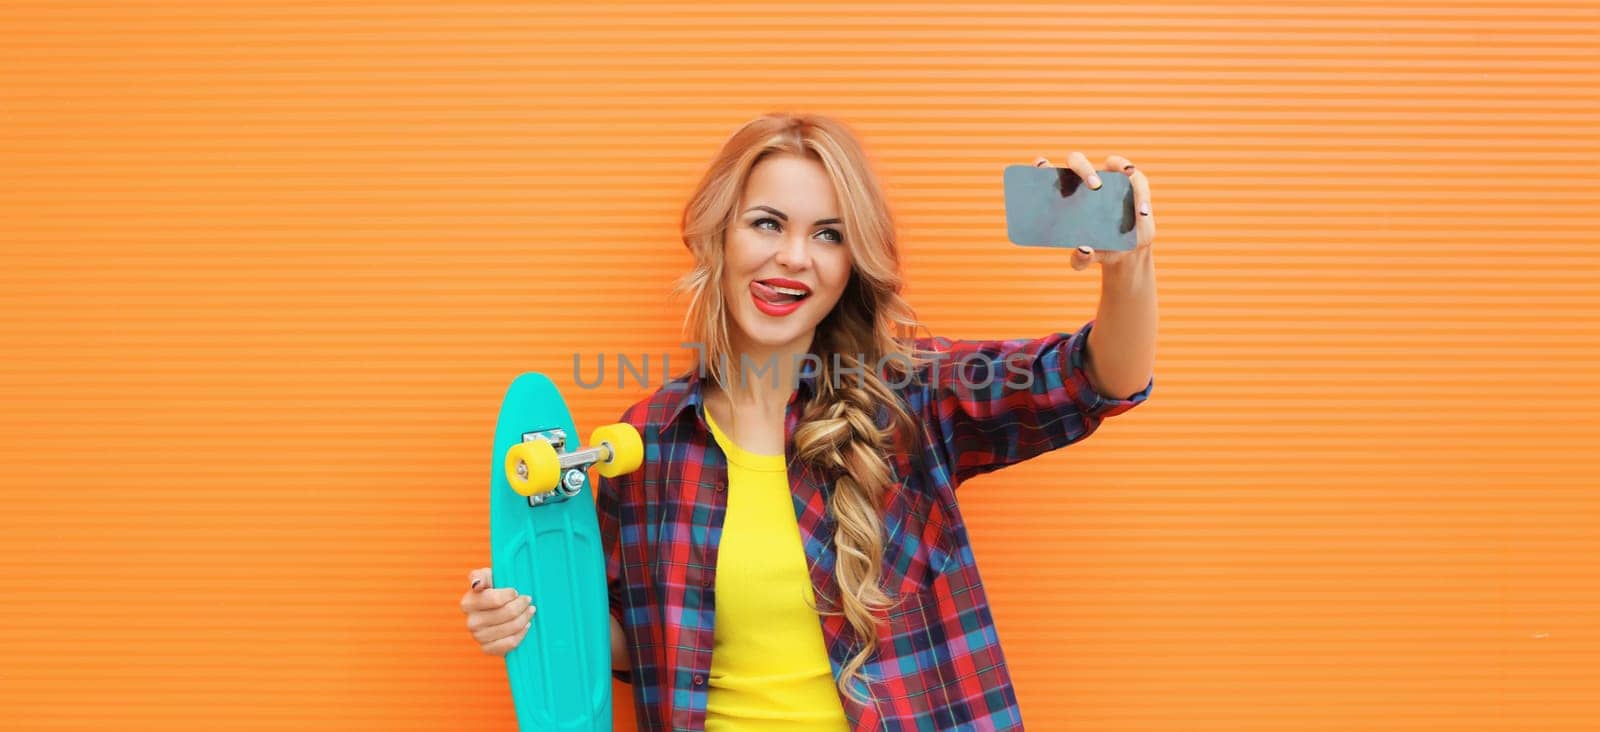 Summer portrait of happy smiling blonde young woman taking selfie with smartphone and skateboard by Rohappy